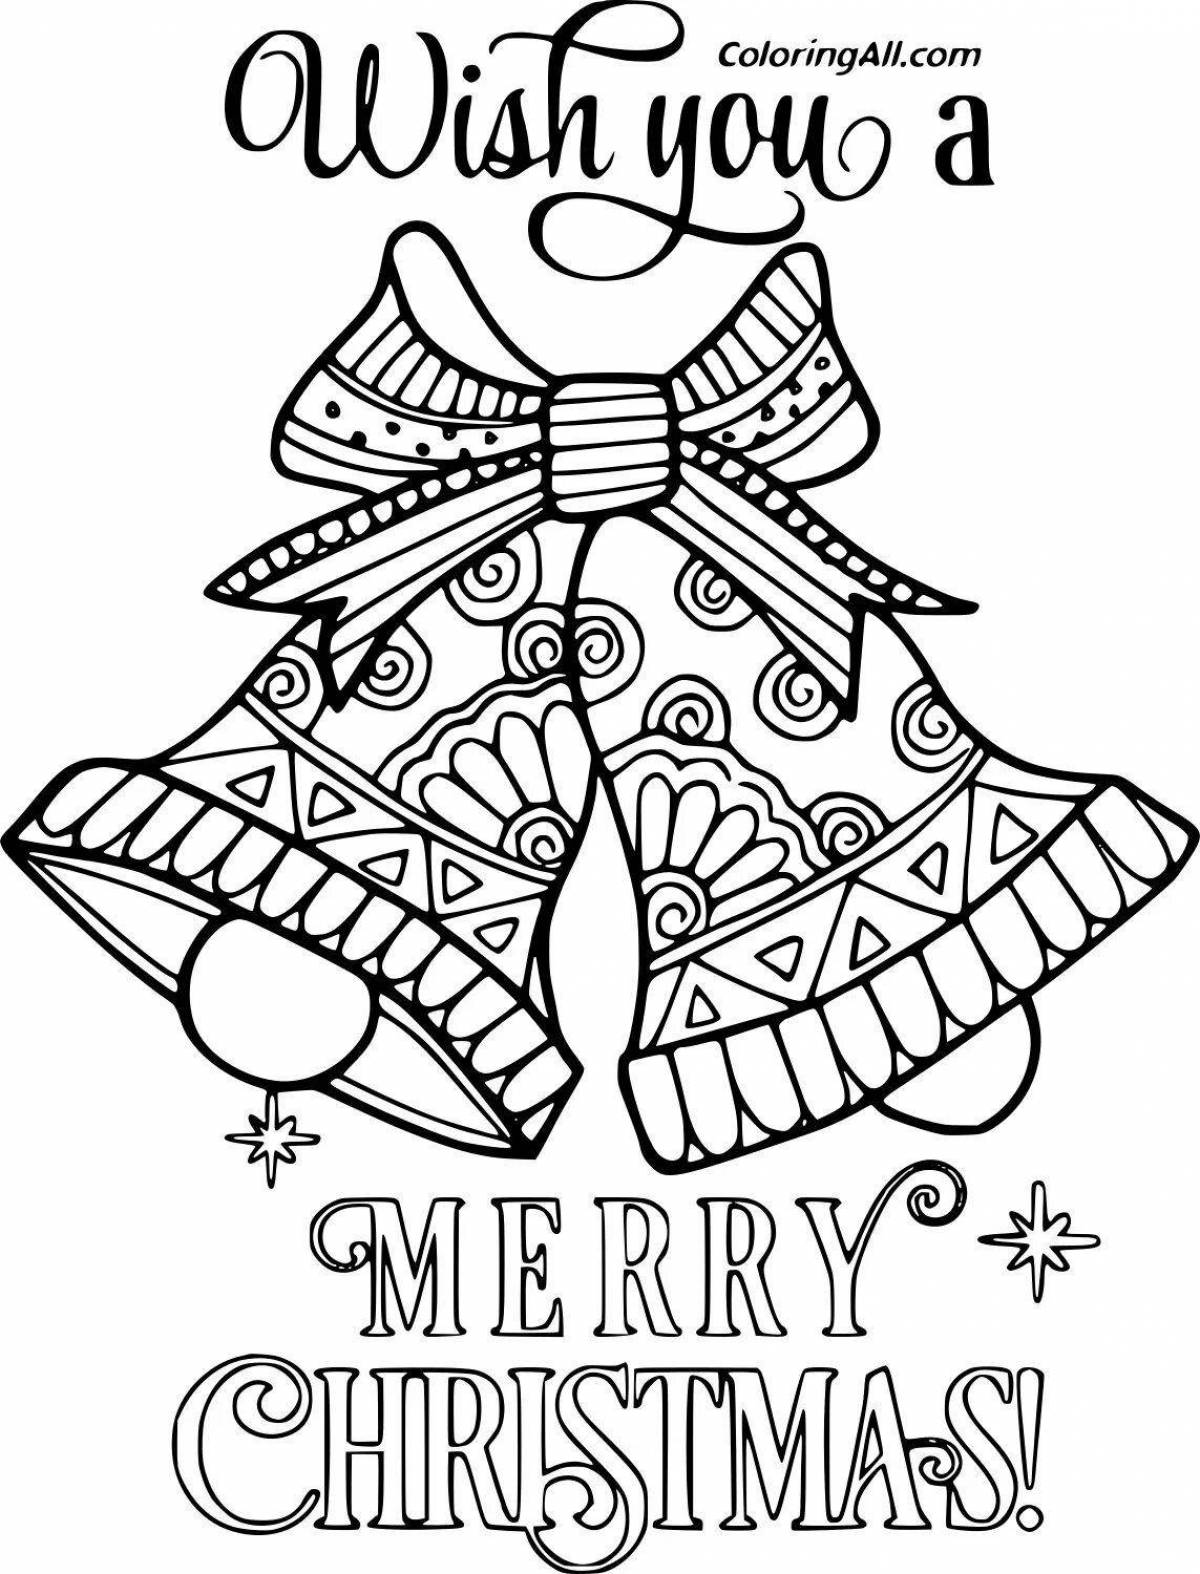 Amazing jingle bells coloring pages